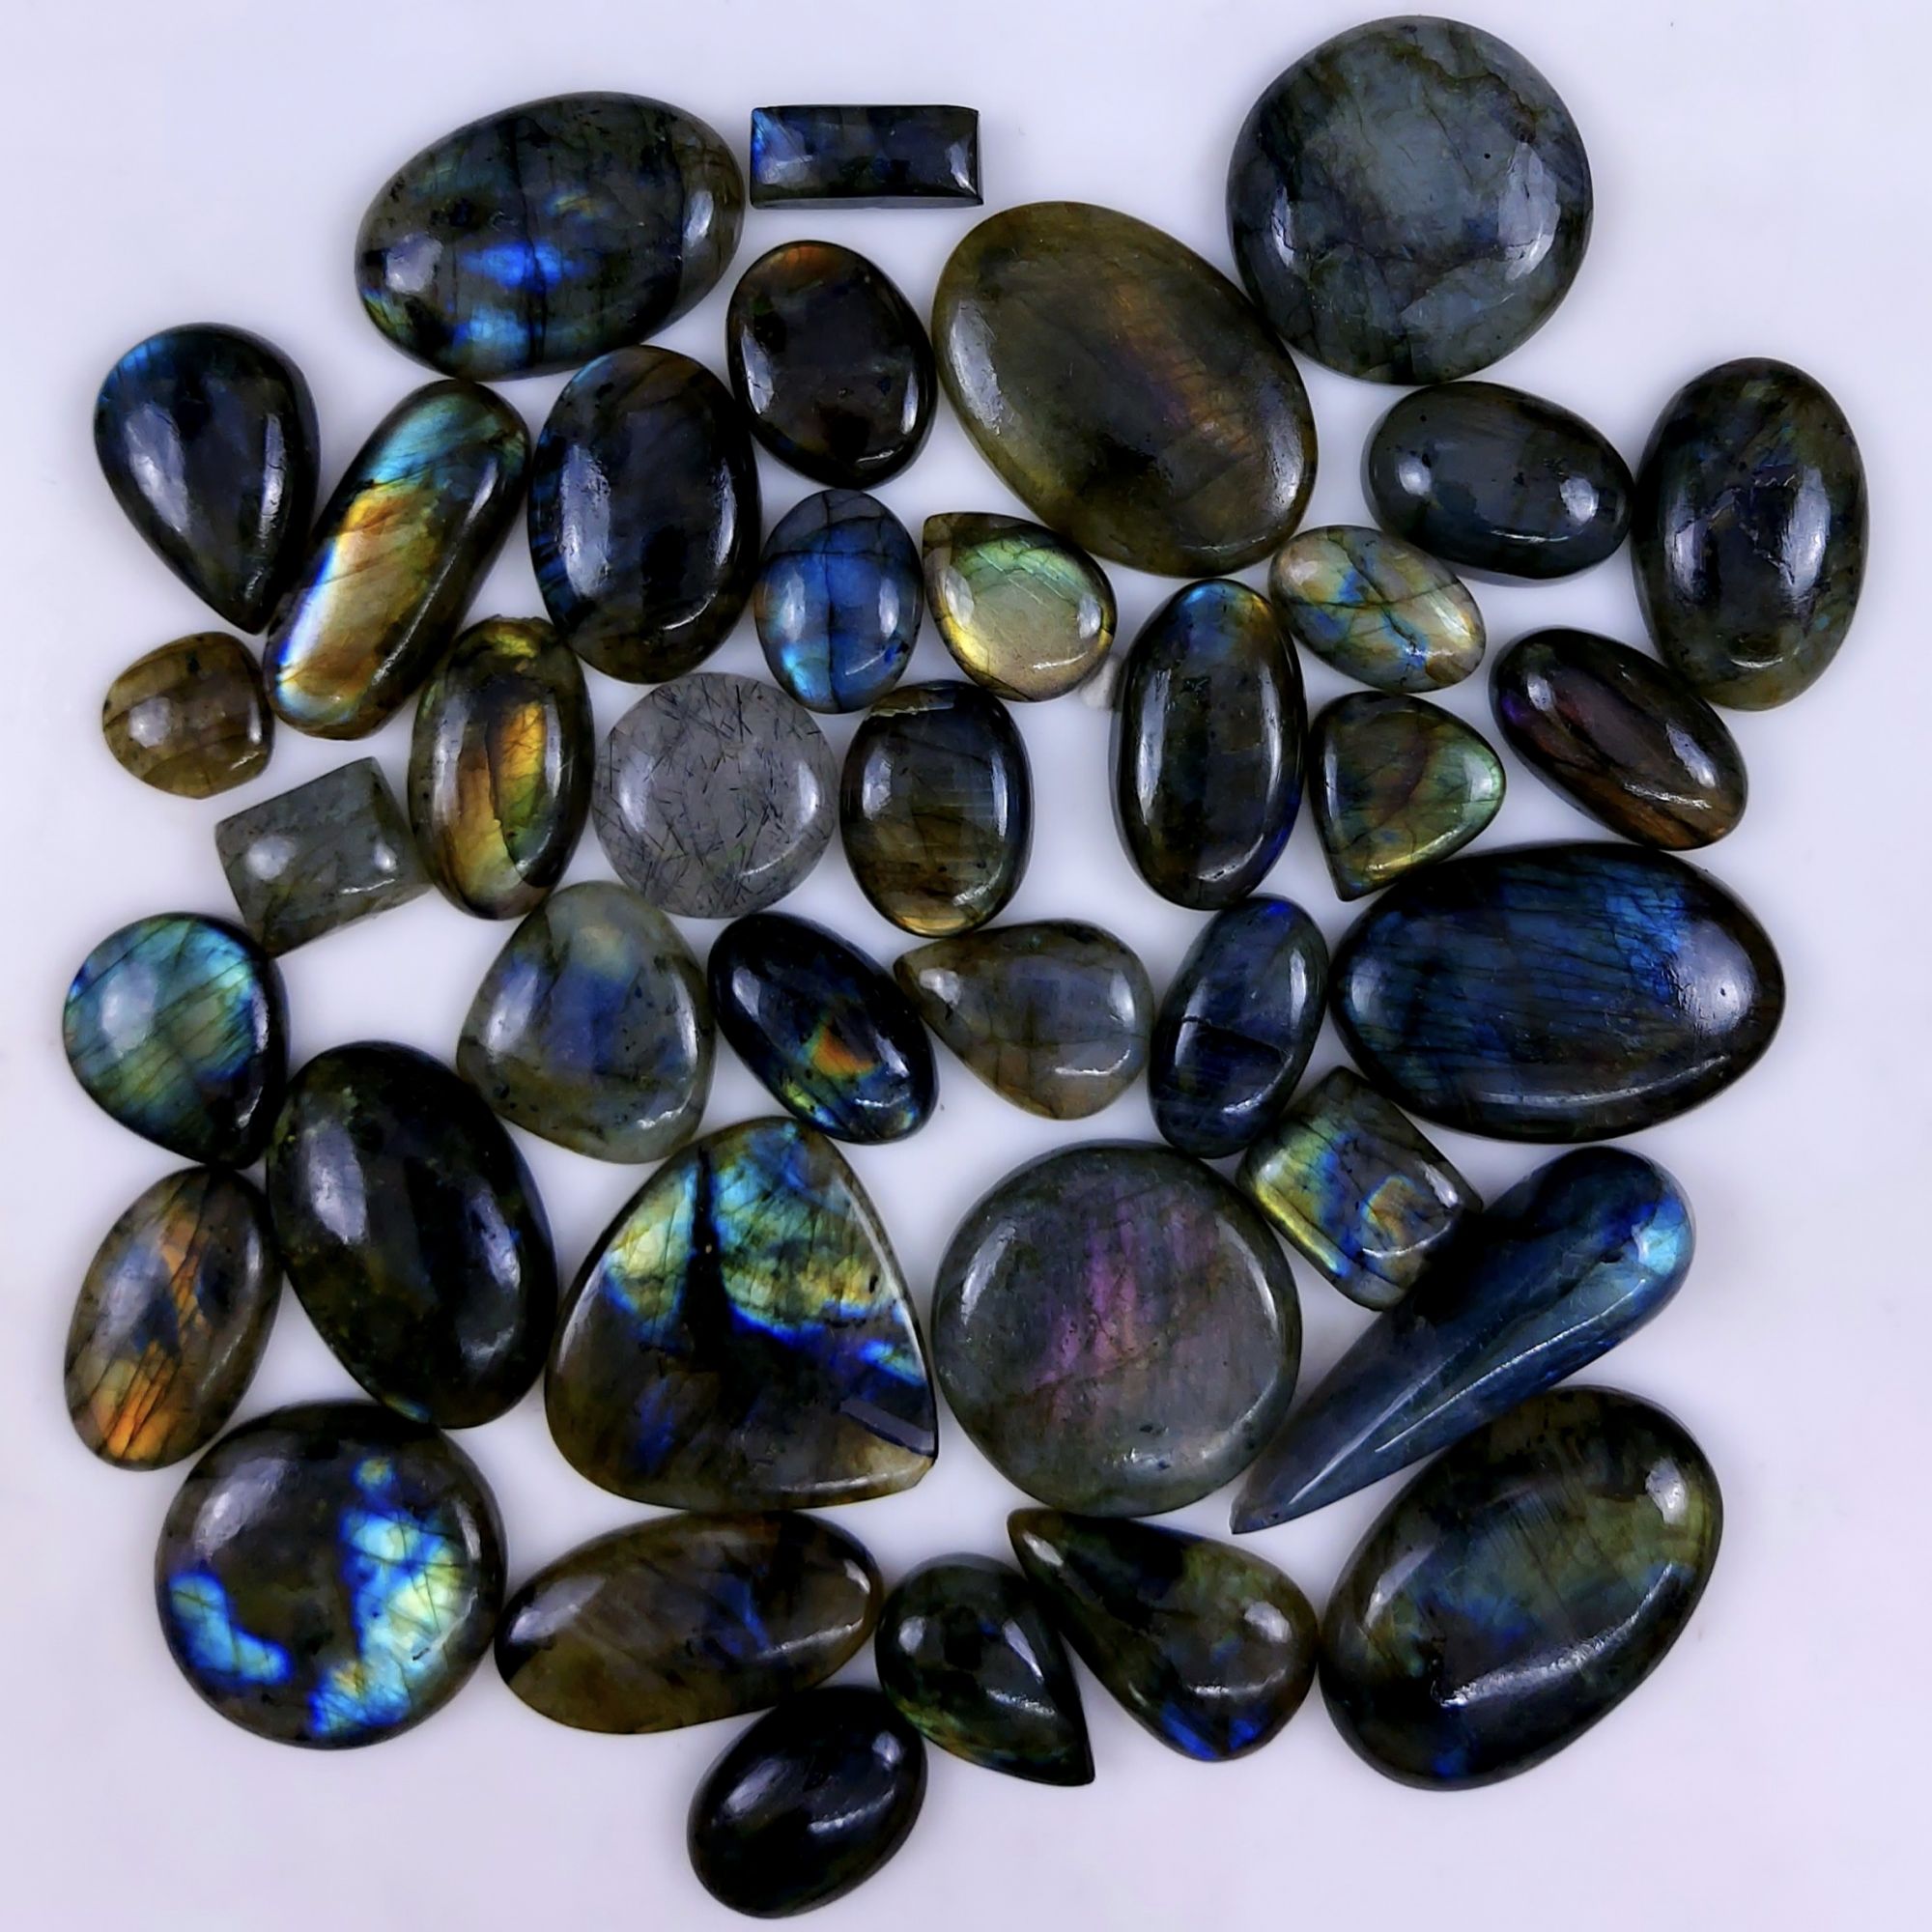 38pc 1430Cts Labradorite Cabochon Multifire Healing Crystal For Jewelry Supplies, Labradorite Necklace Handmade Wire Wrapped Gemstone Pendant 40x27 20x16mm#6332